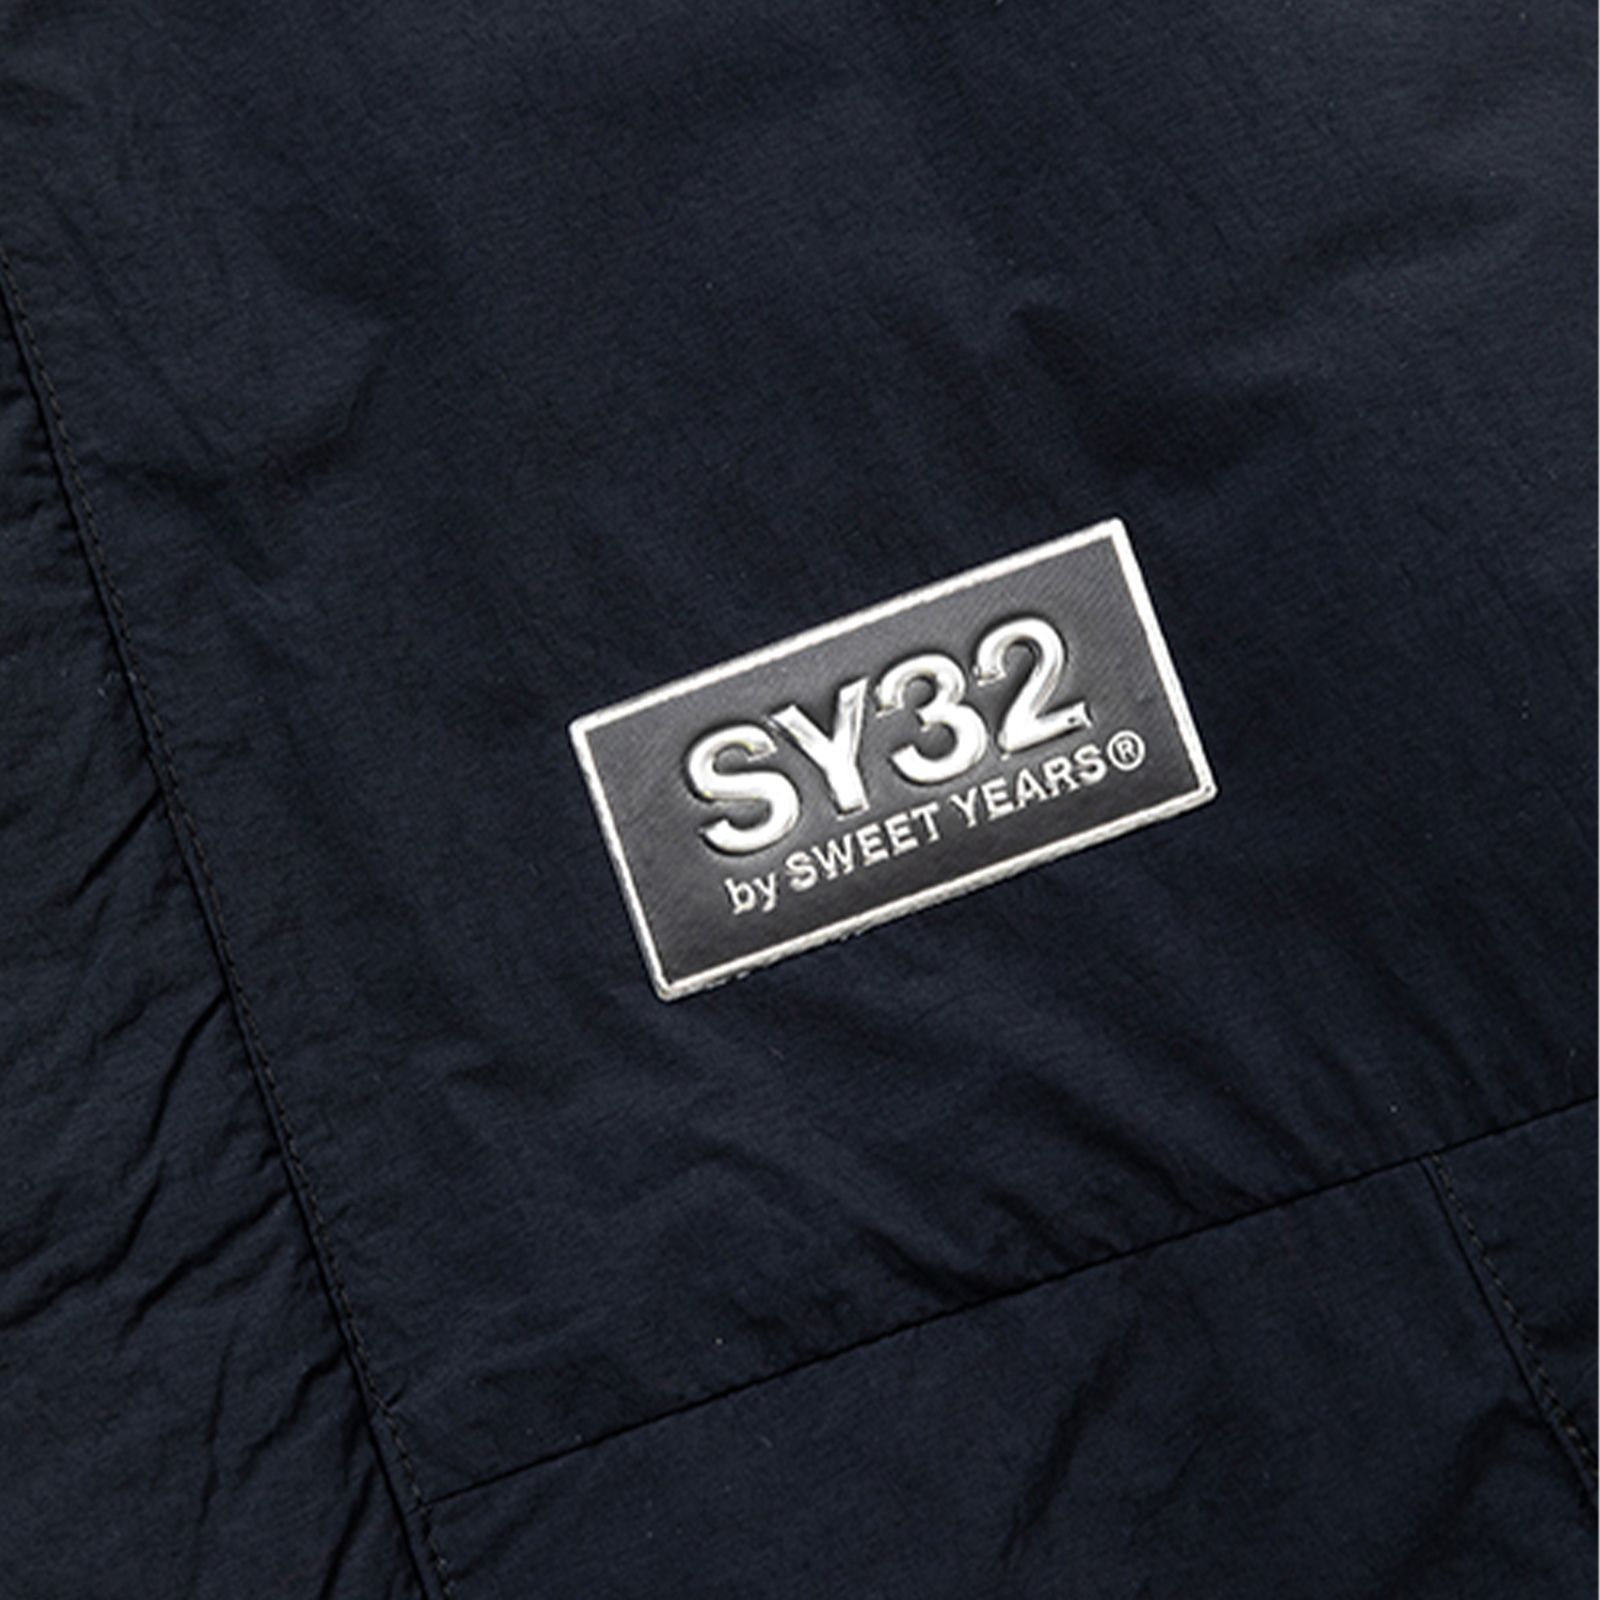 SY32 by SWEET YEARS - insulation wide silhouette relaxing coat